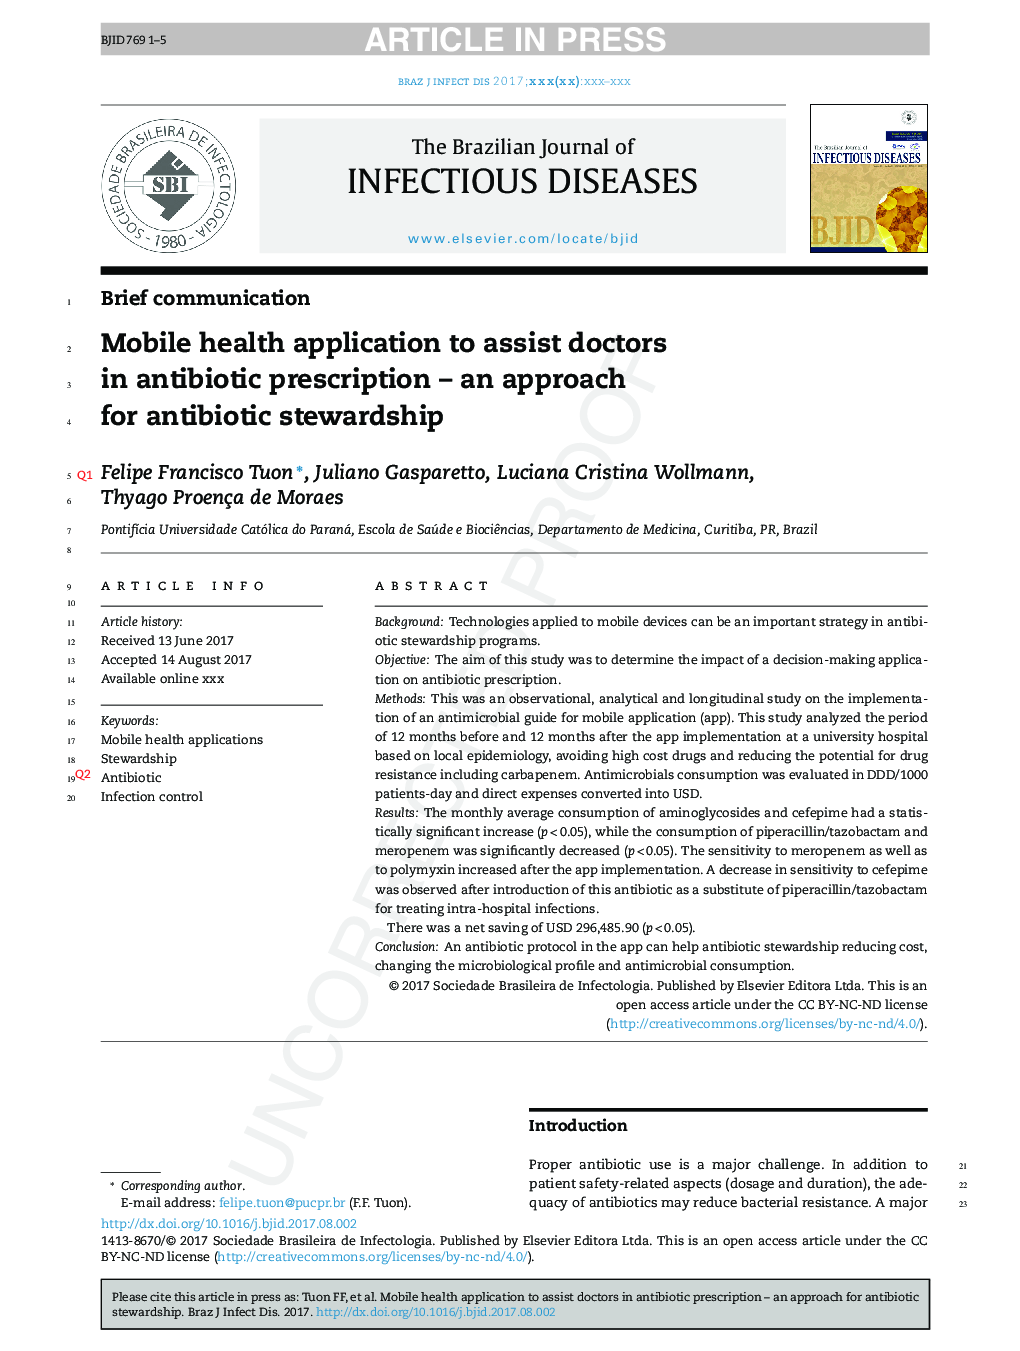 Mobile health application to assist doctors in antibiotic prescription - an approach for antibiotic stewardship